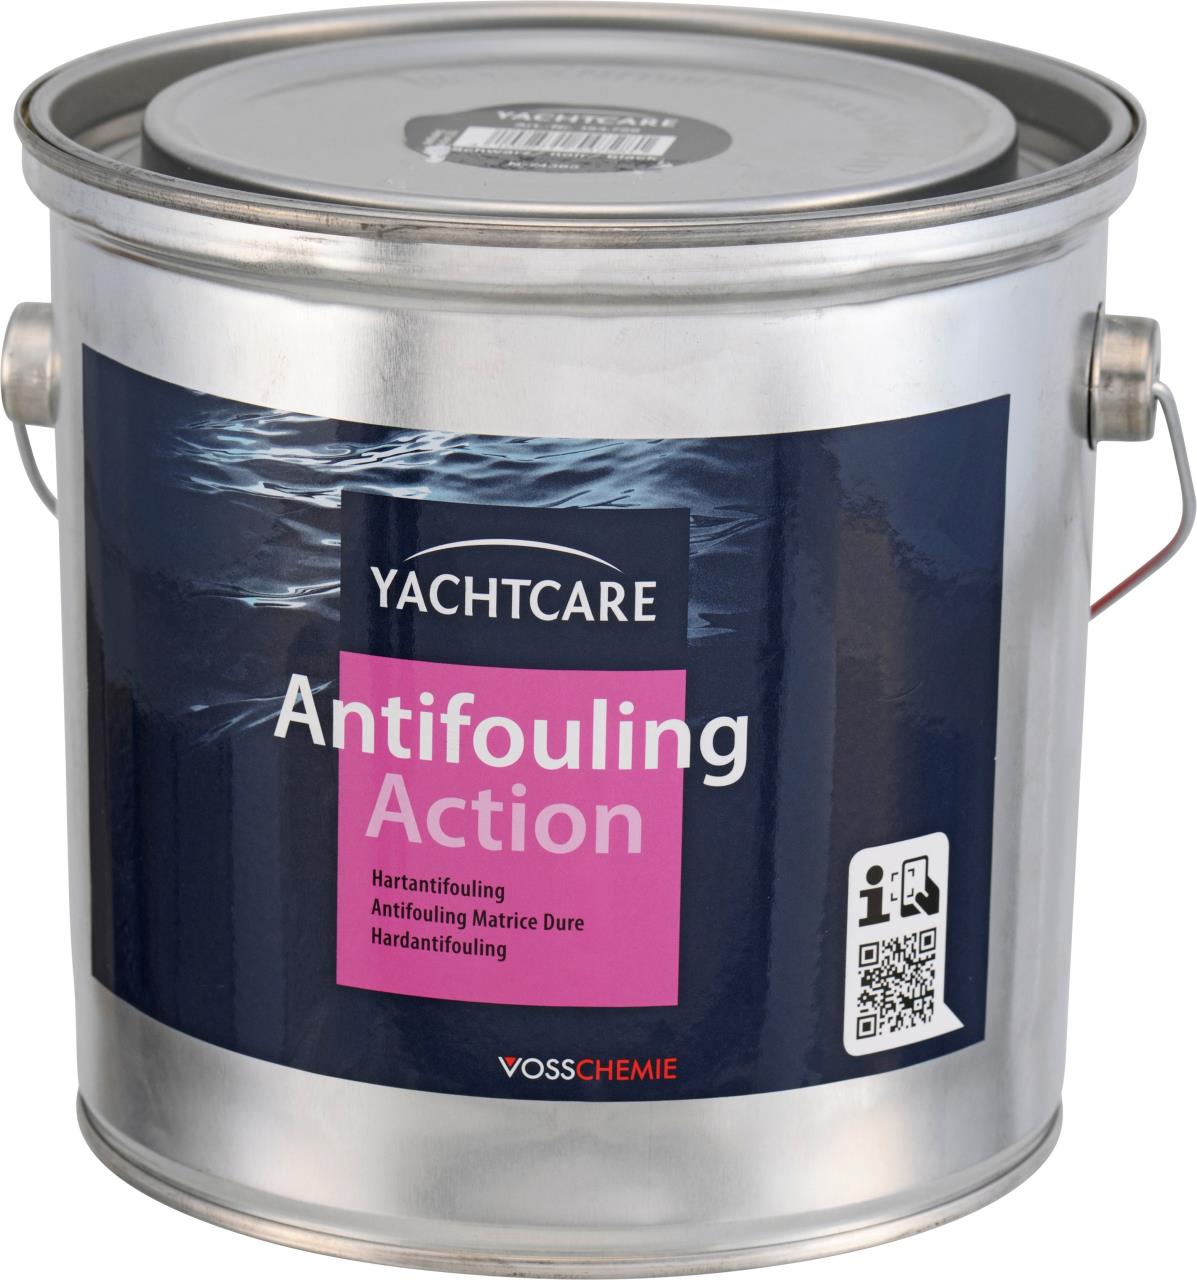 yachtcare antifouling action test